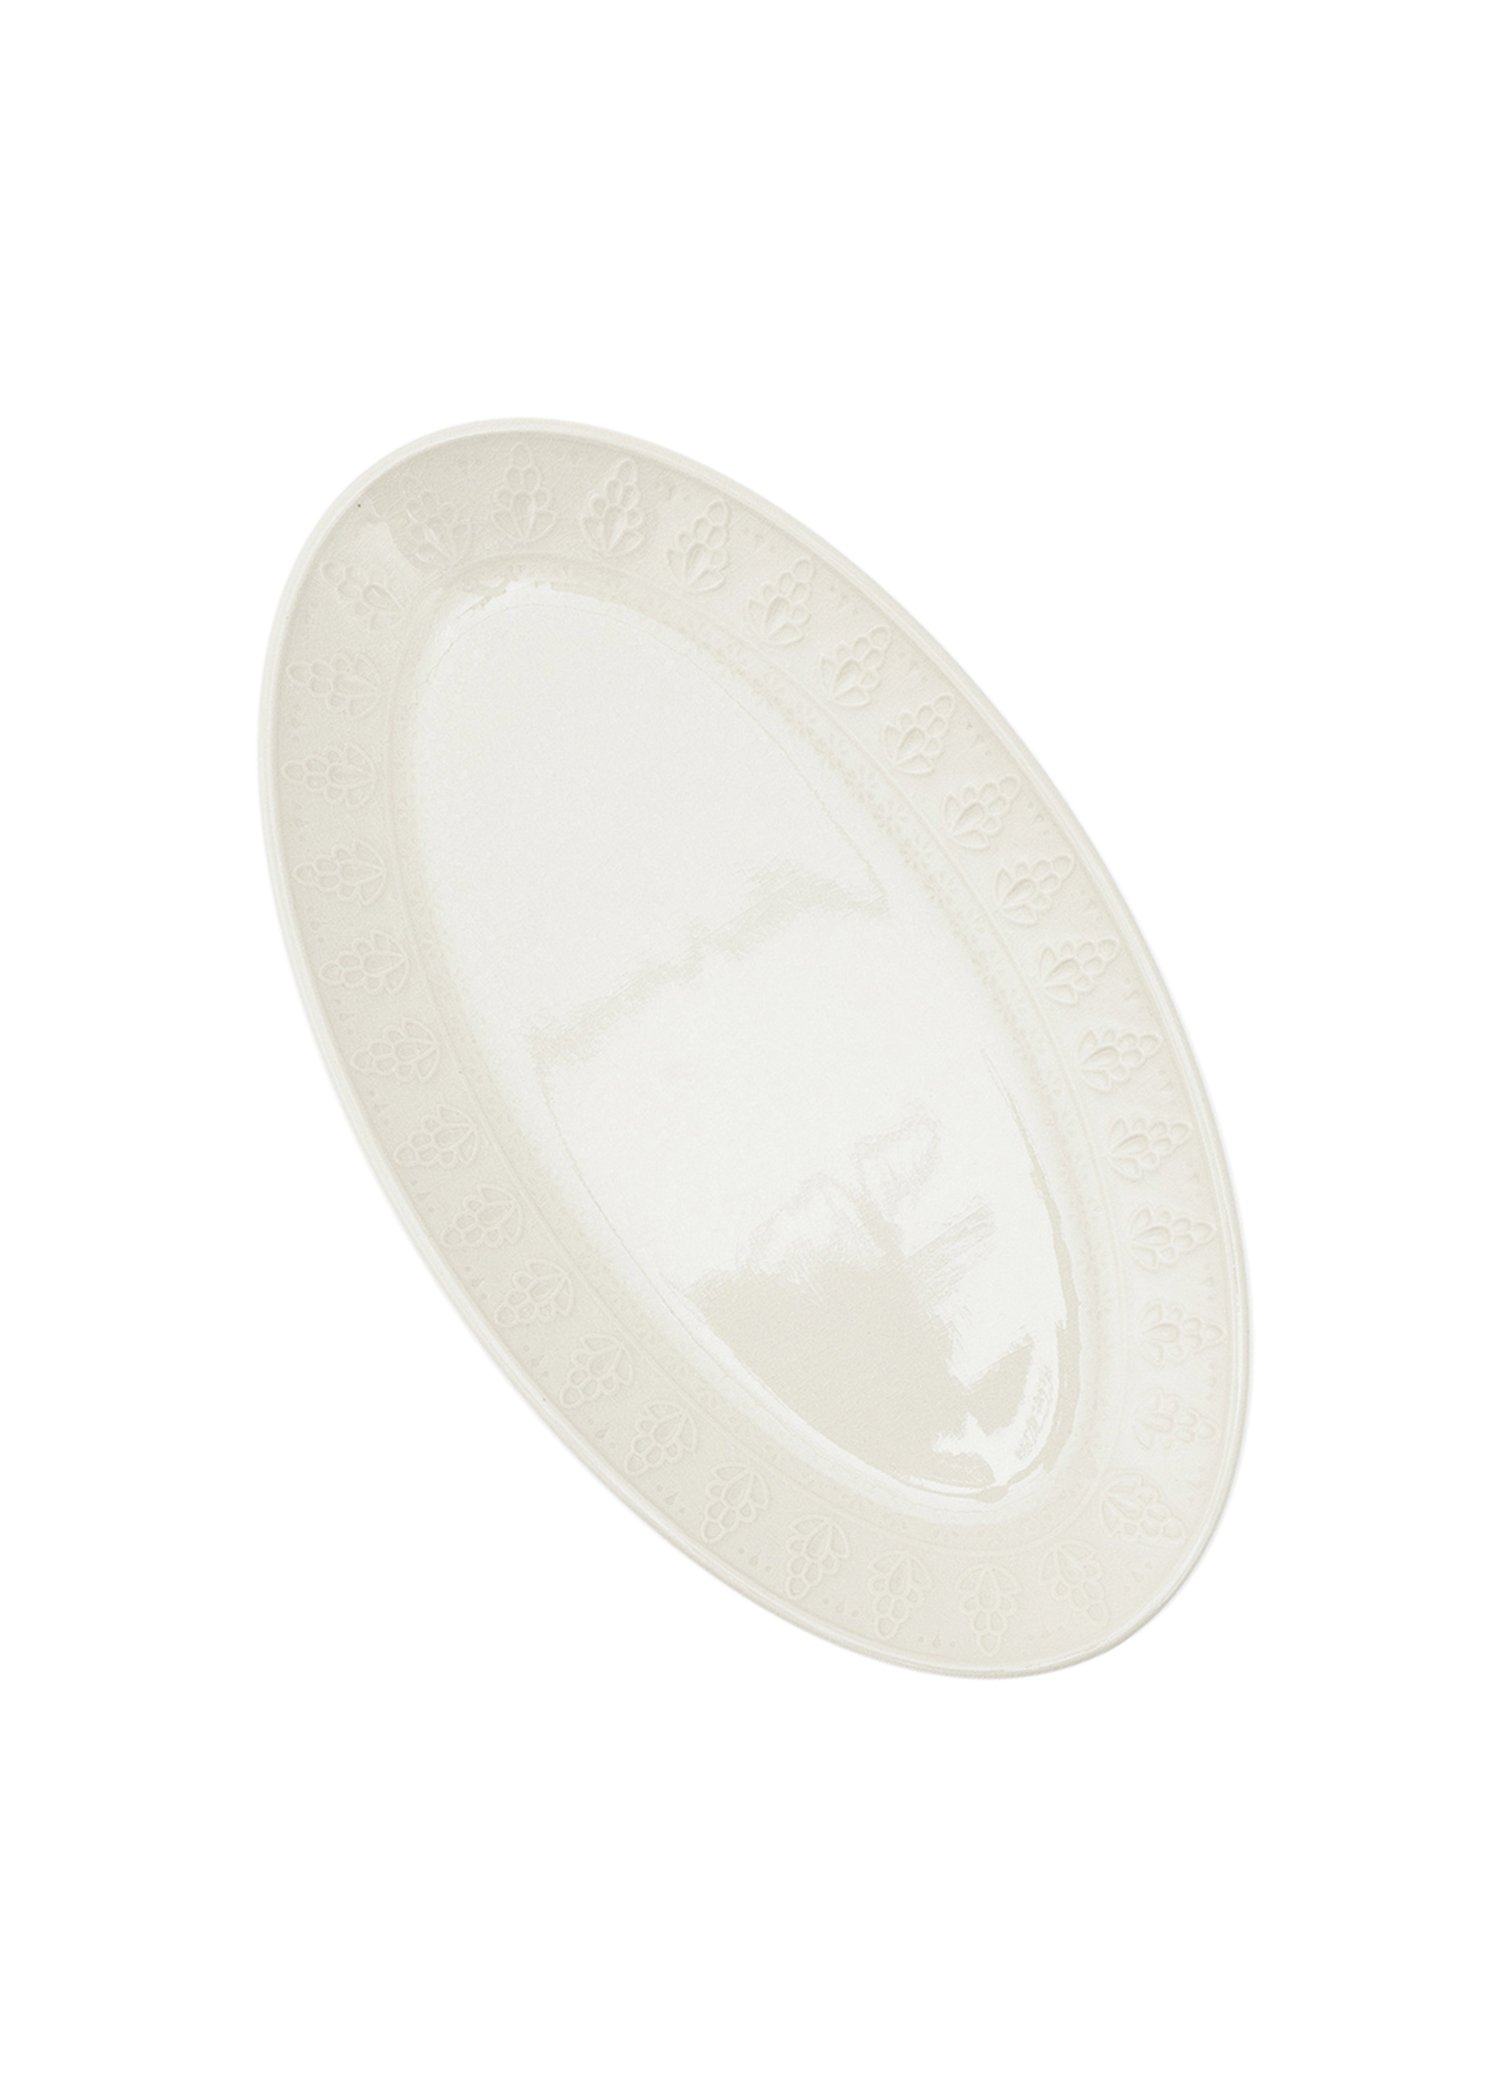 Stoneware oval serving plate